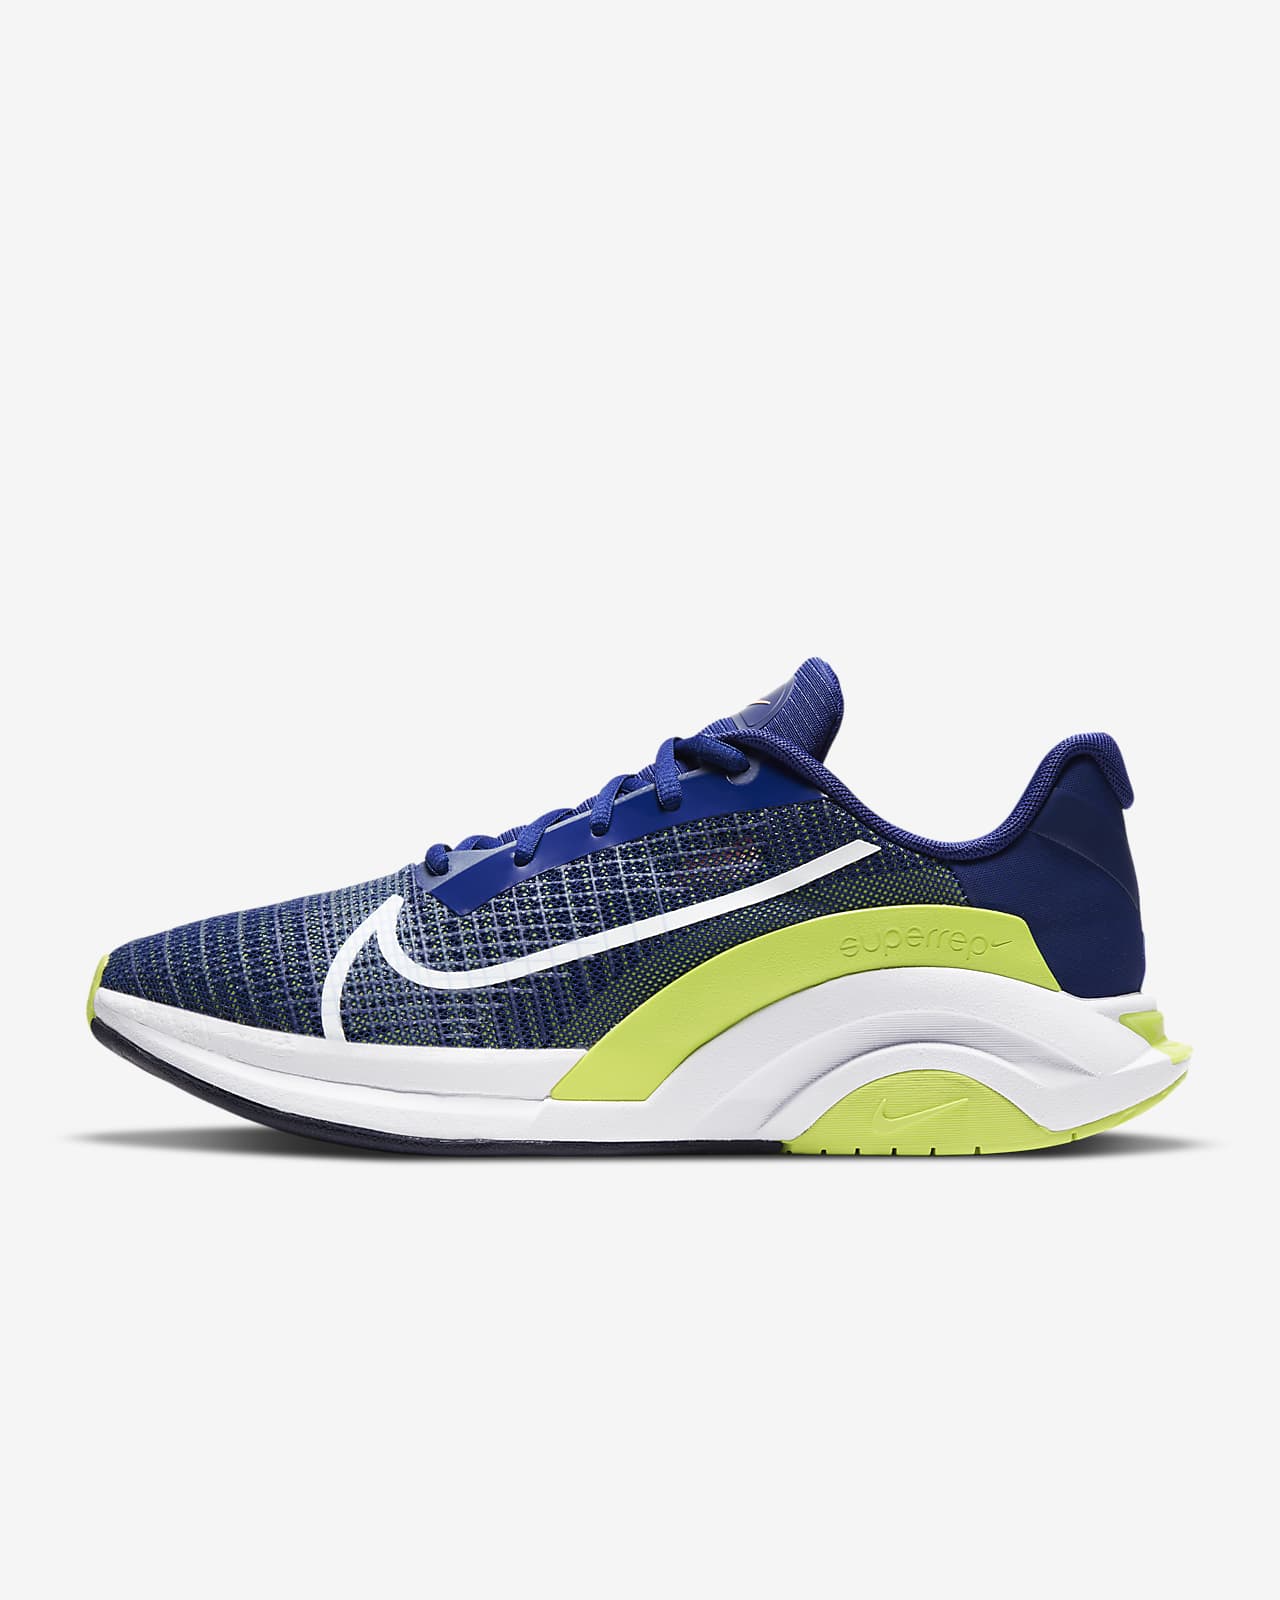 nike zoomx trainers